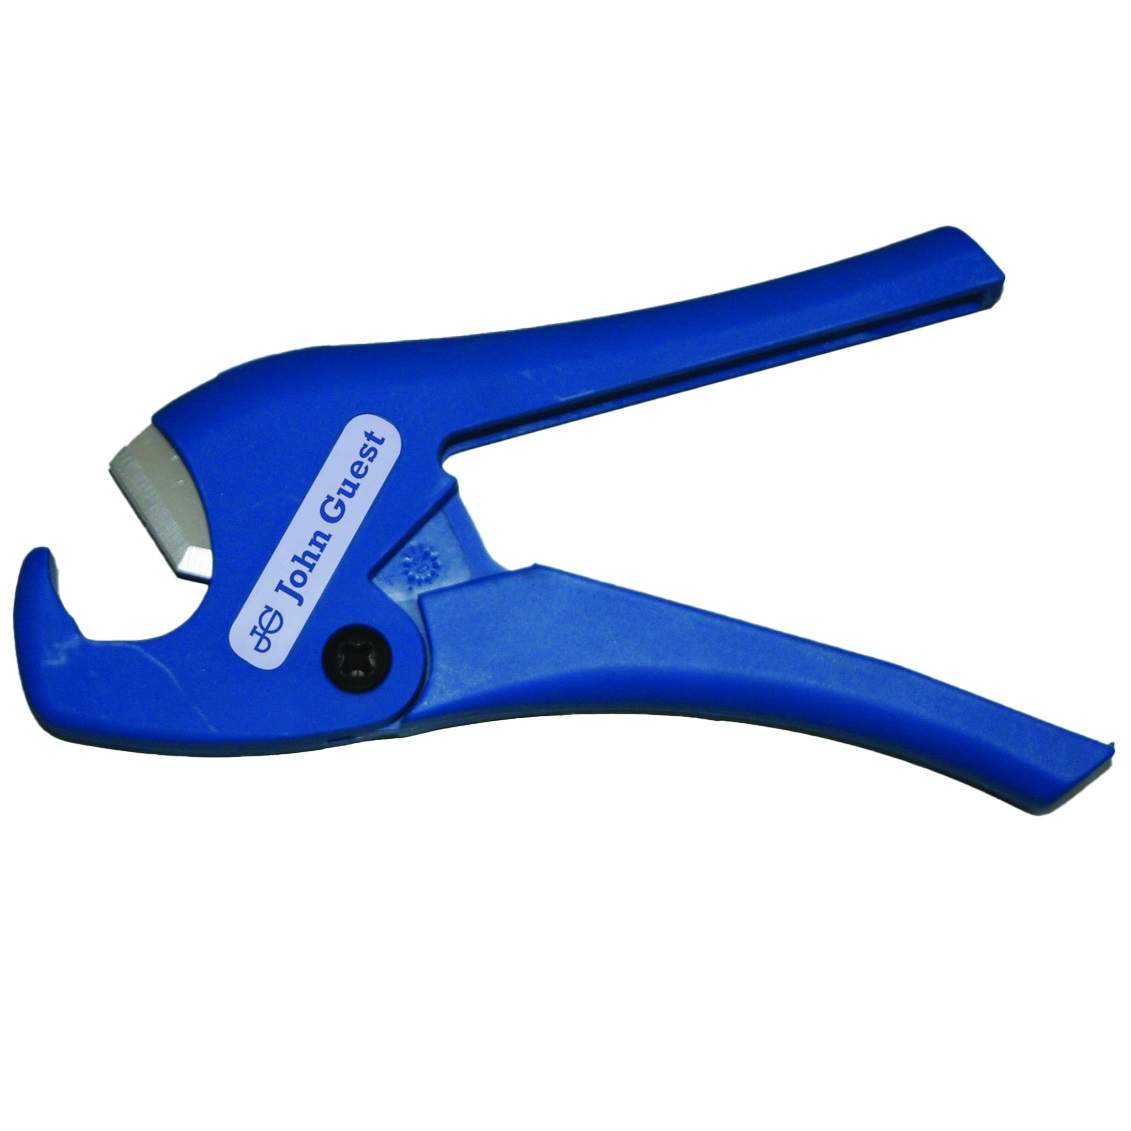 Pipe cutter for pipes from 4 mm to 22 mm